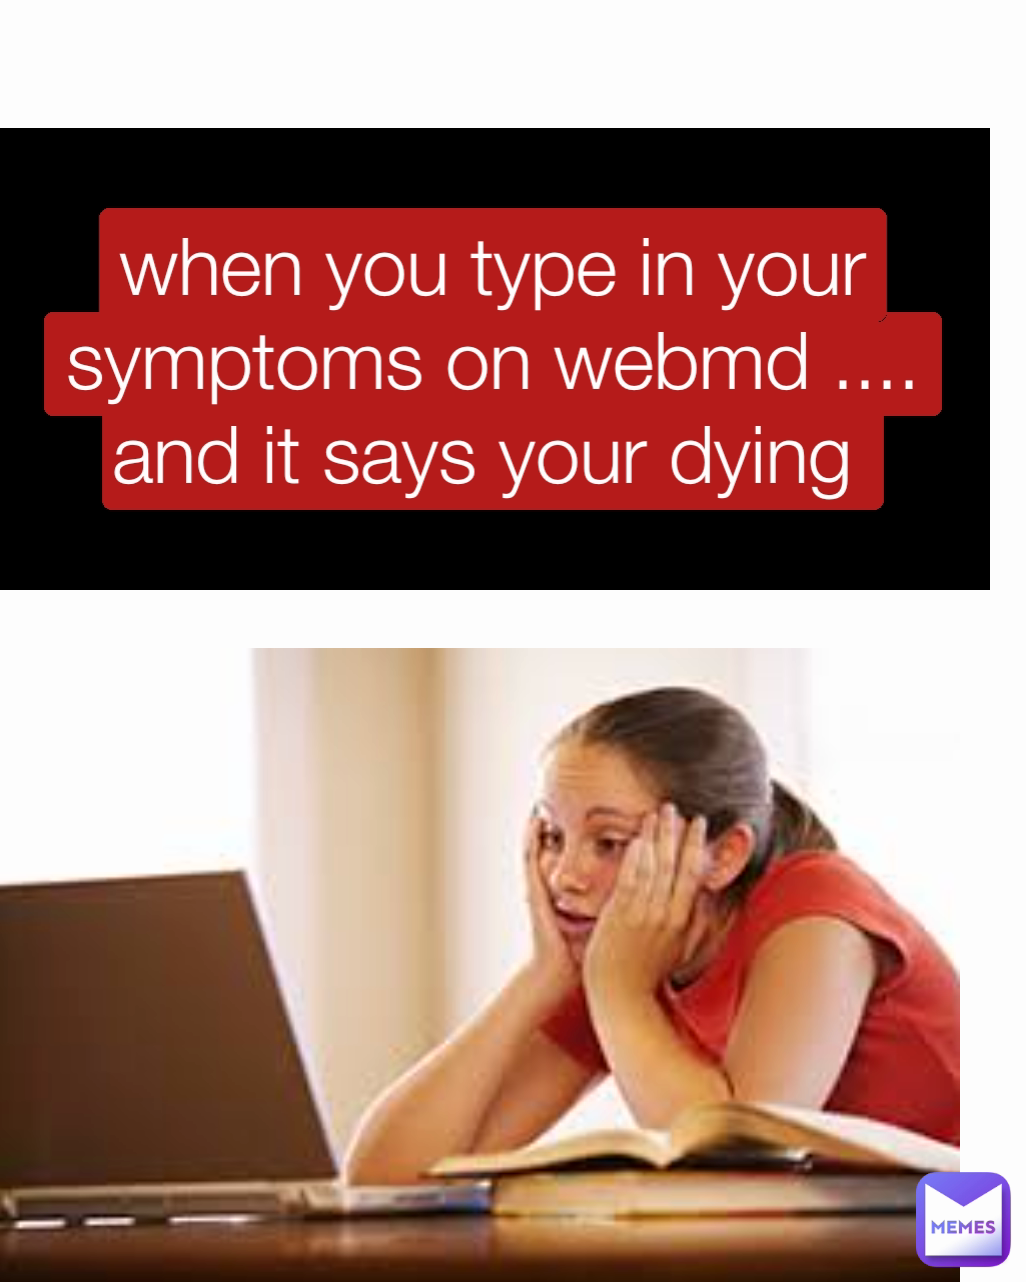 when you type in your symptoms on webmd ....
and it says your dying 